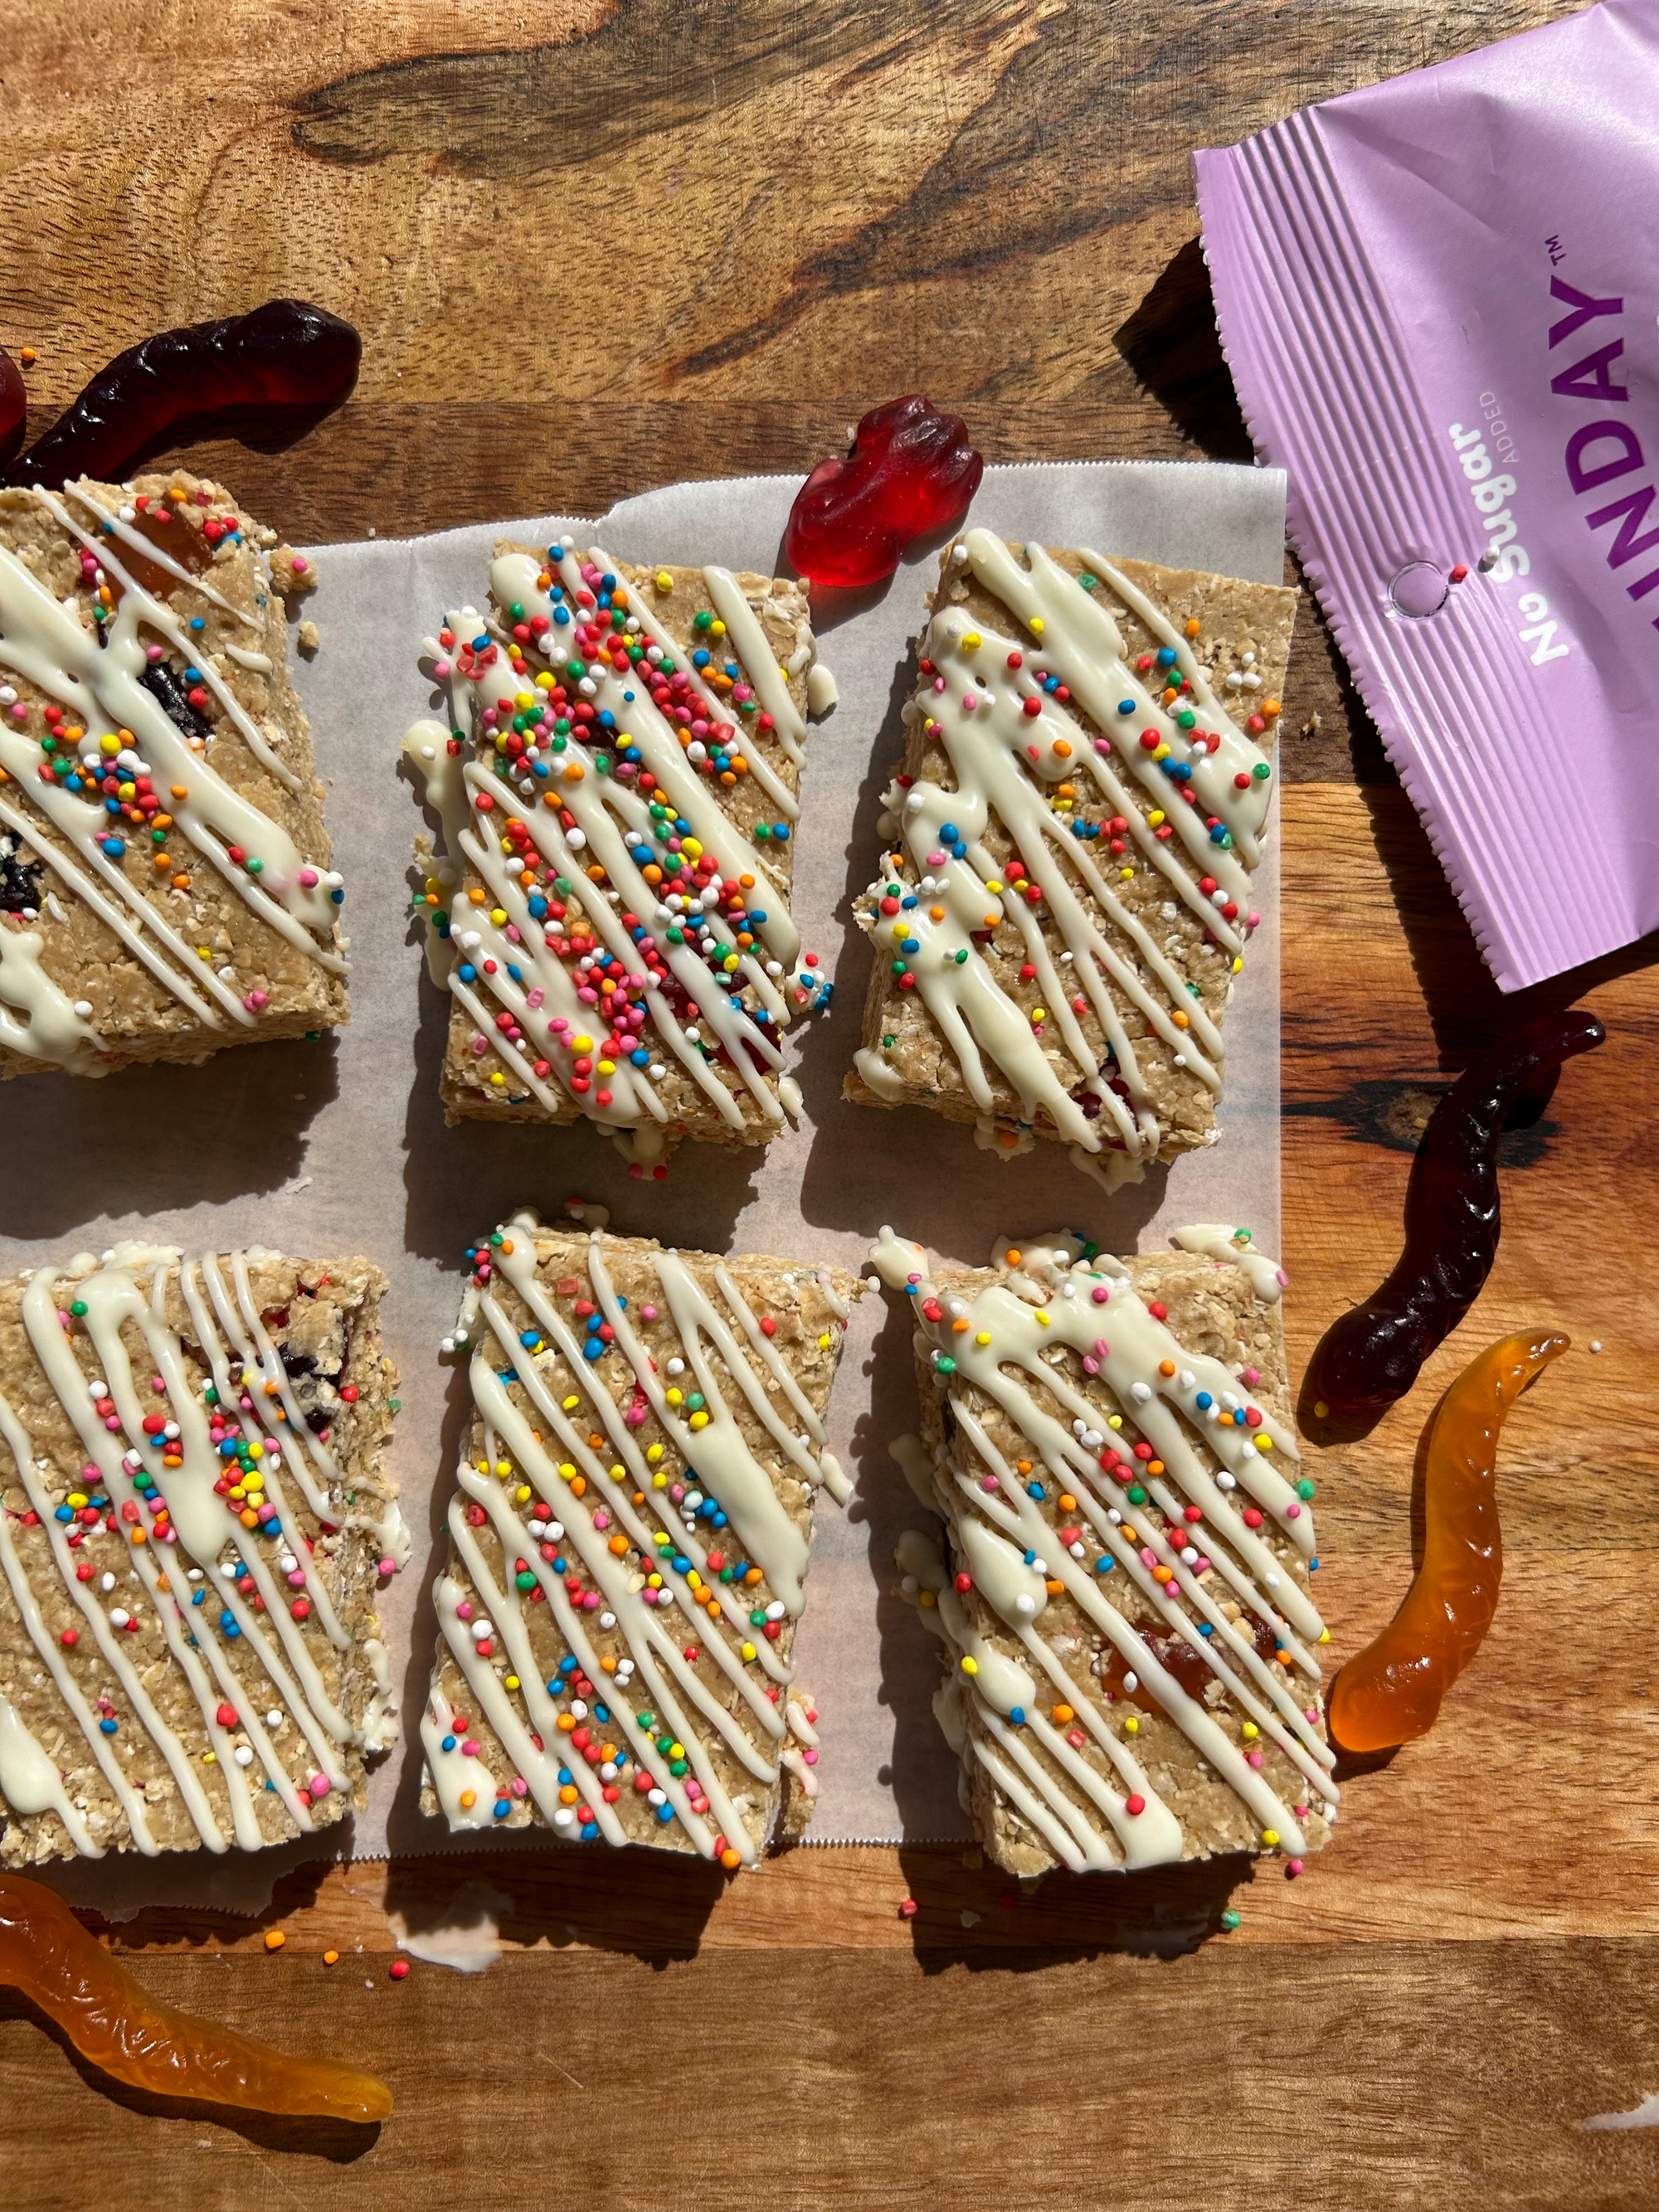 Indulge your inner child: FUNDAY Fairy Bread Protein Bars